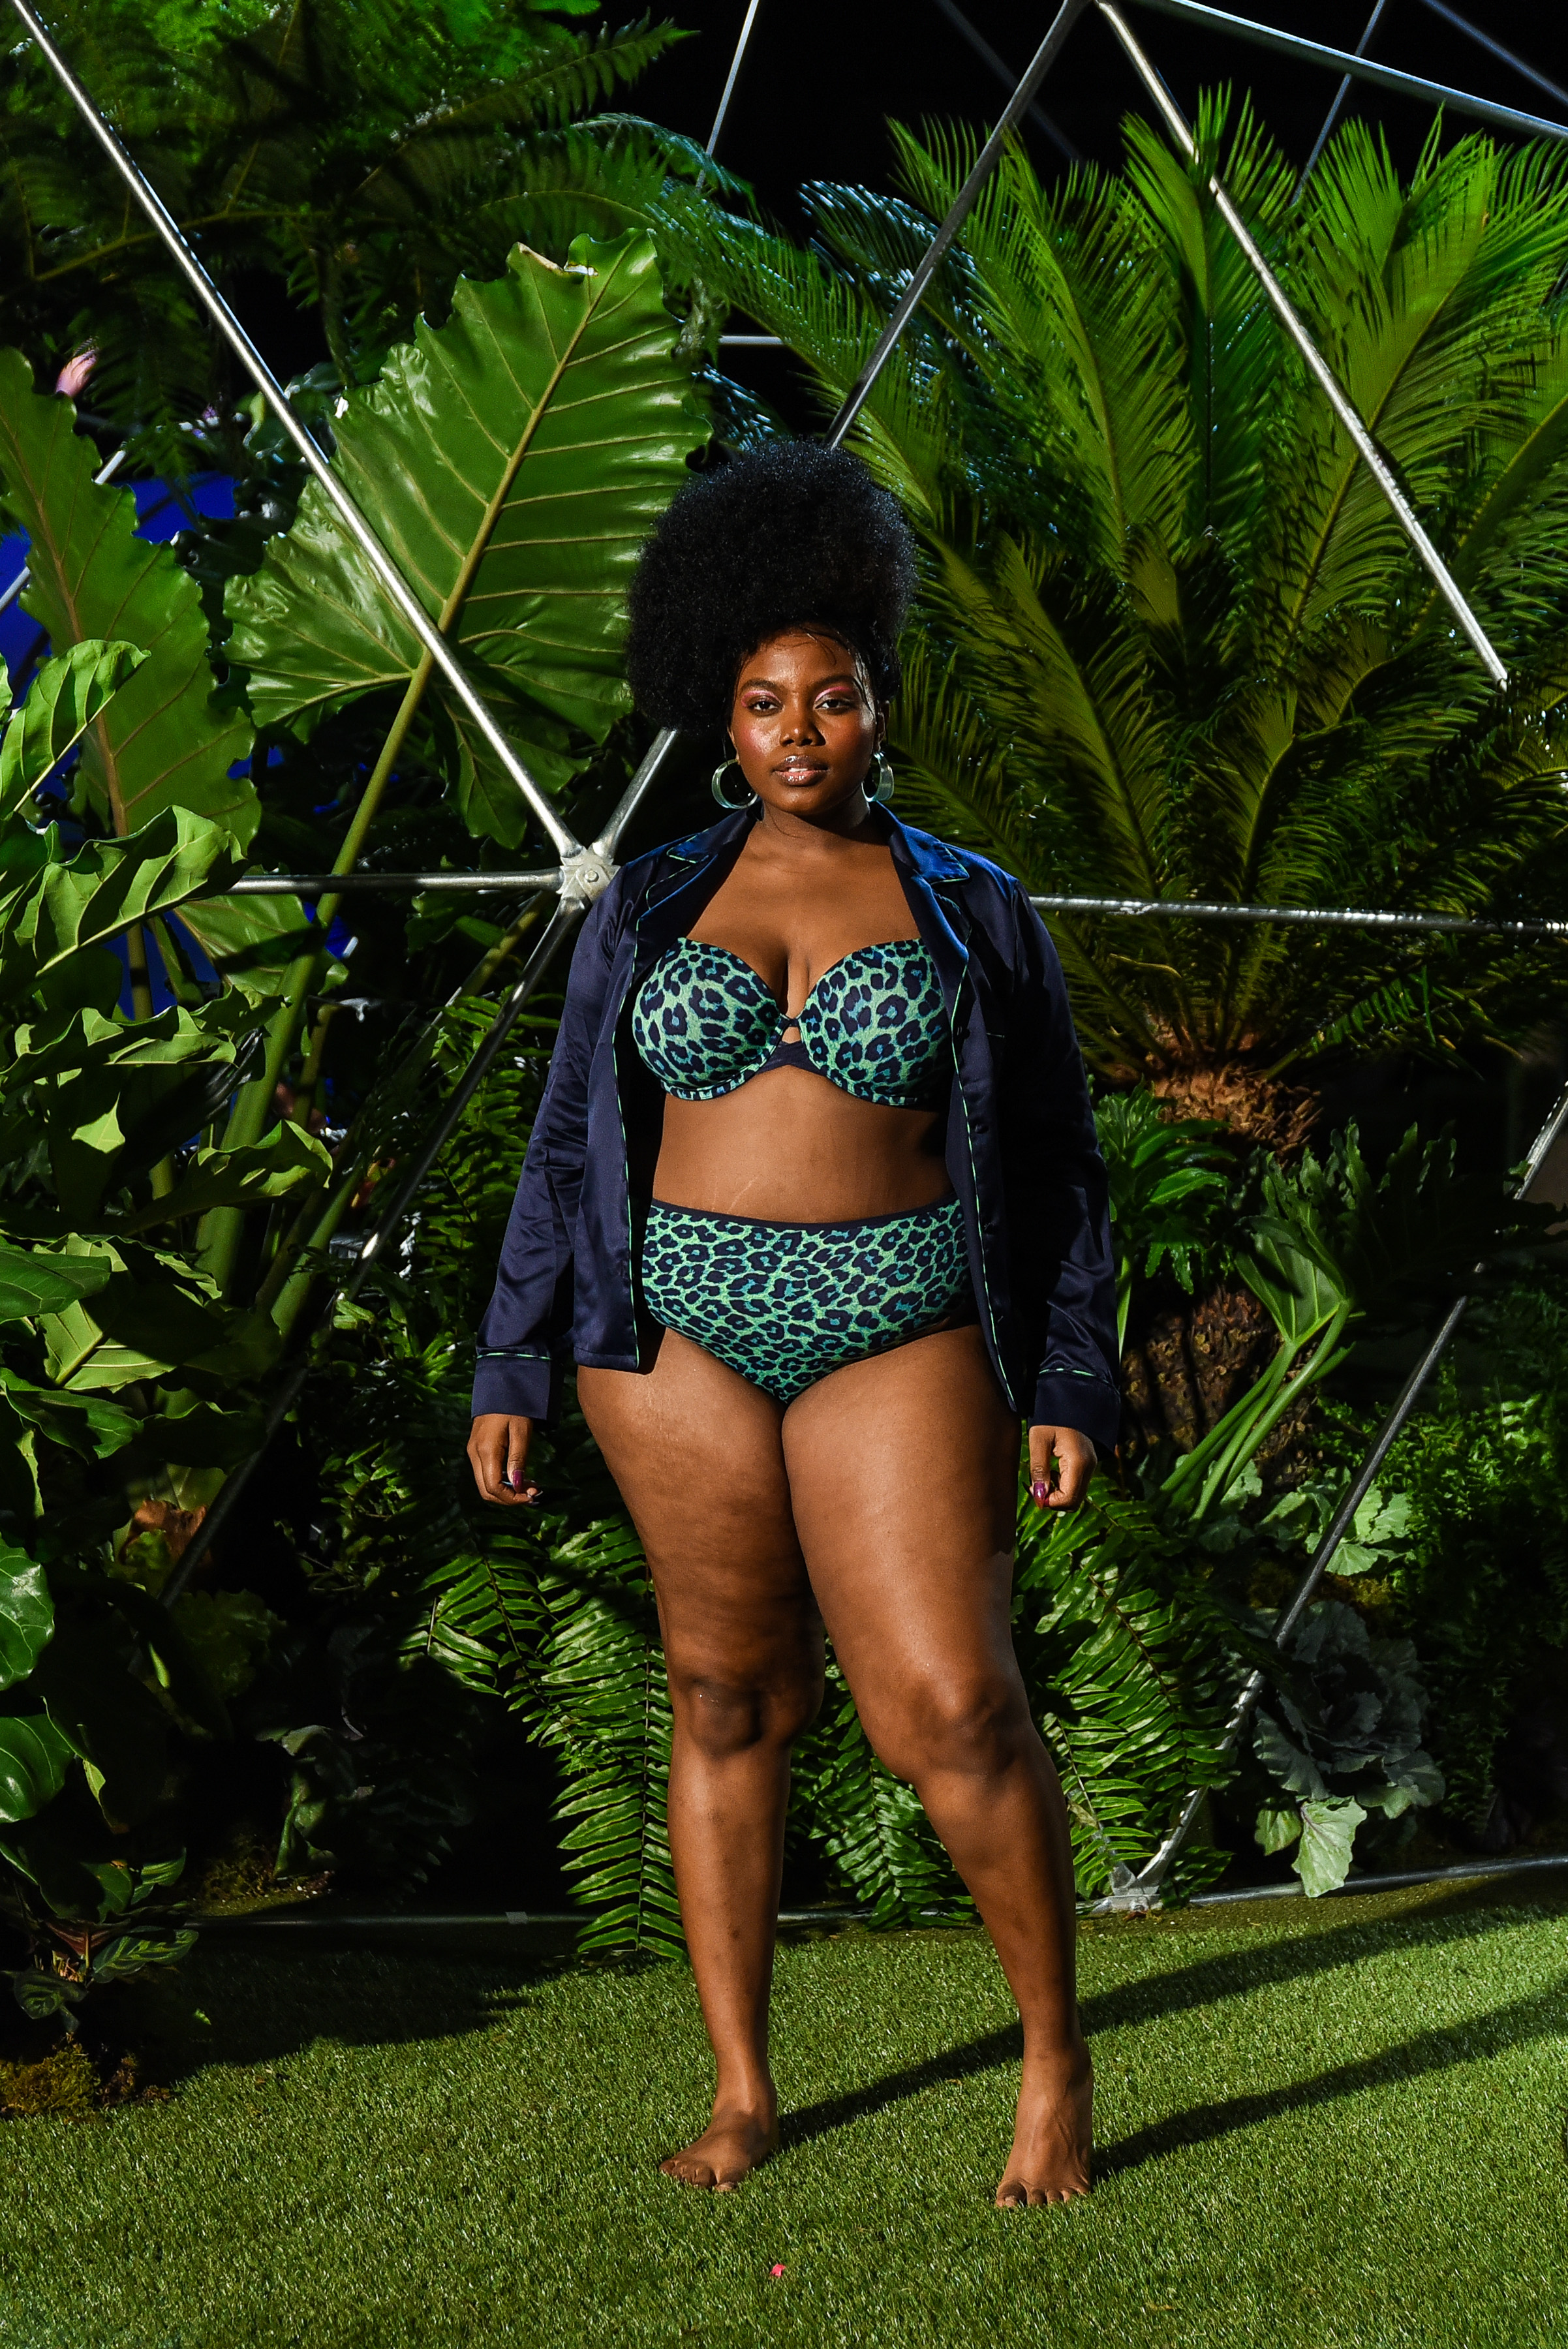 21 Plus Size Models That Can Elevate The Victoria's Secret Runway Show